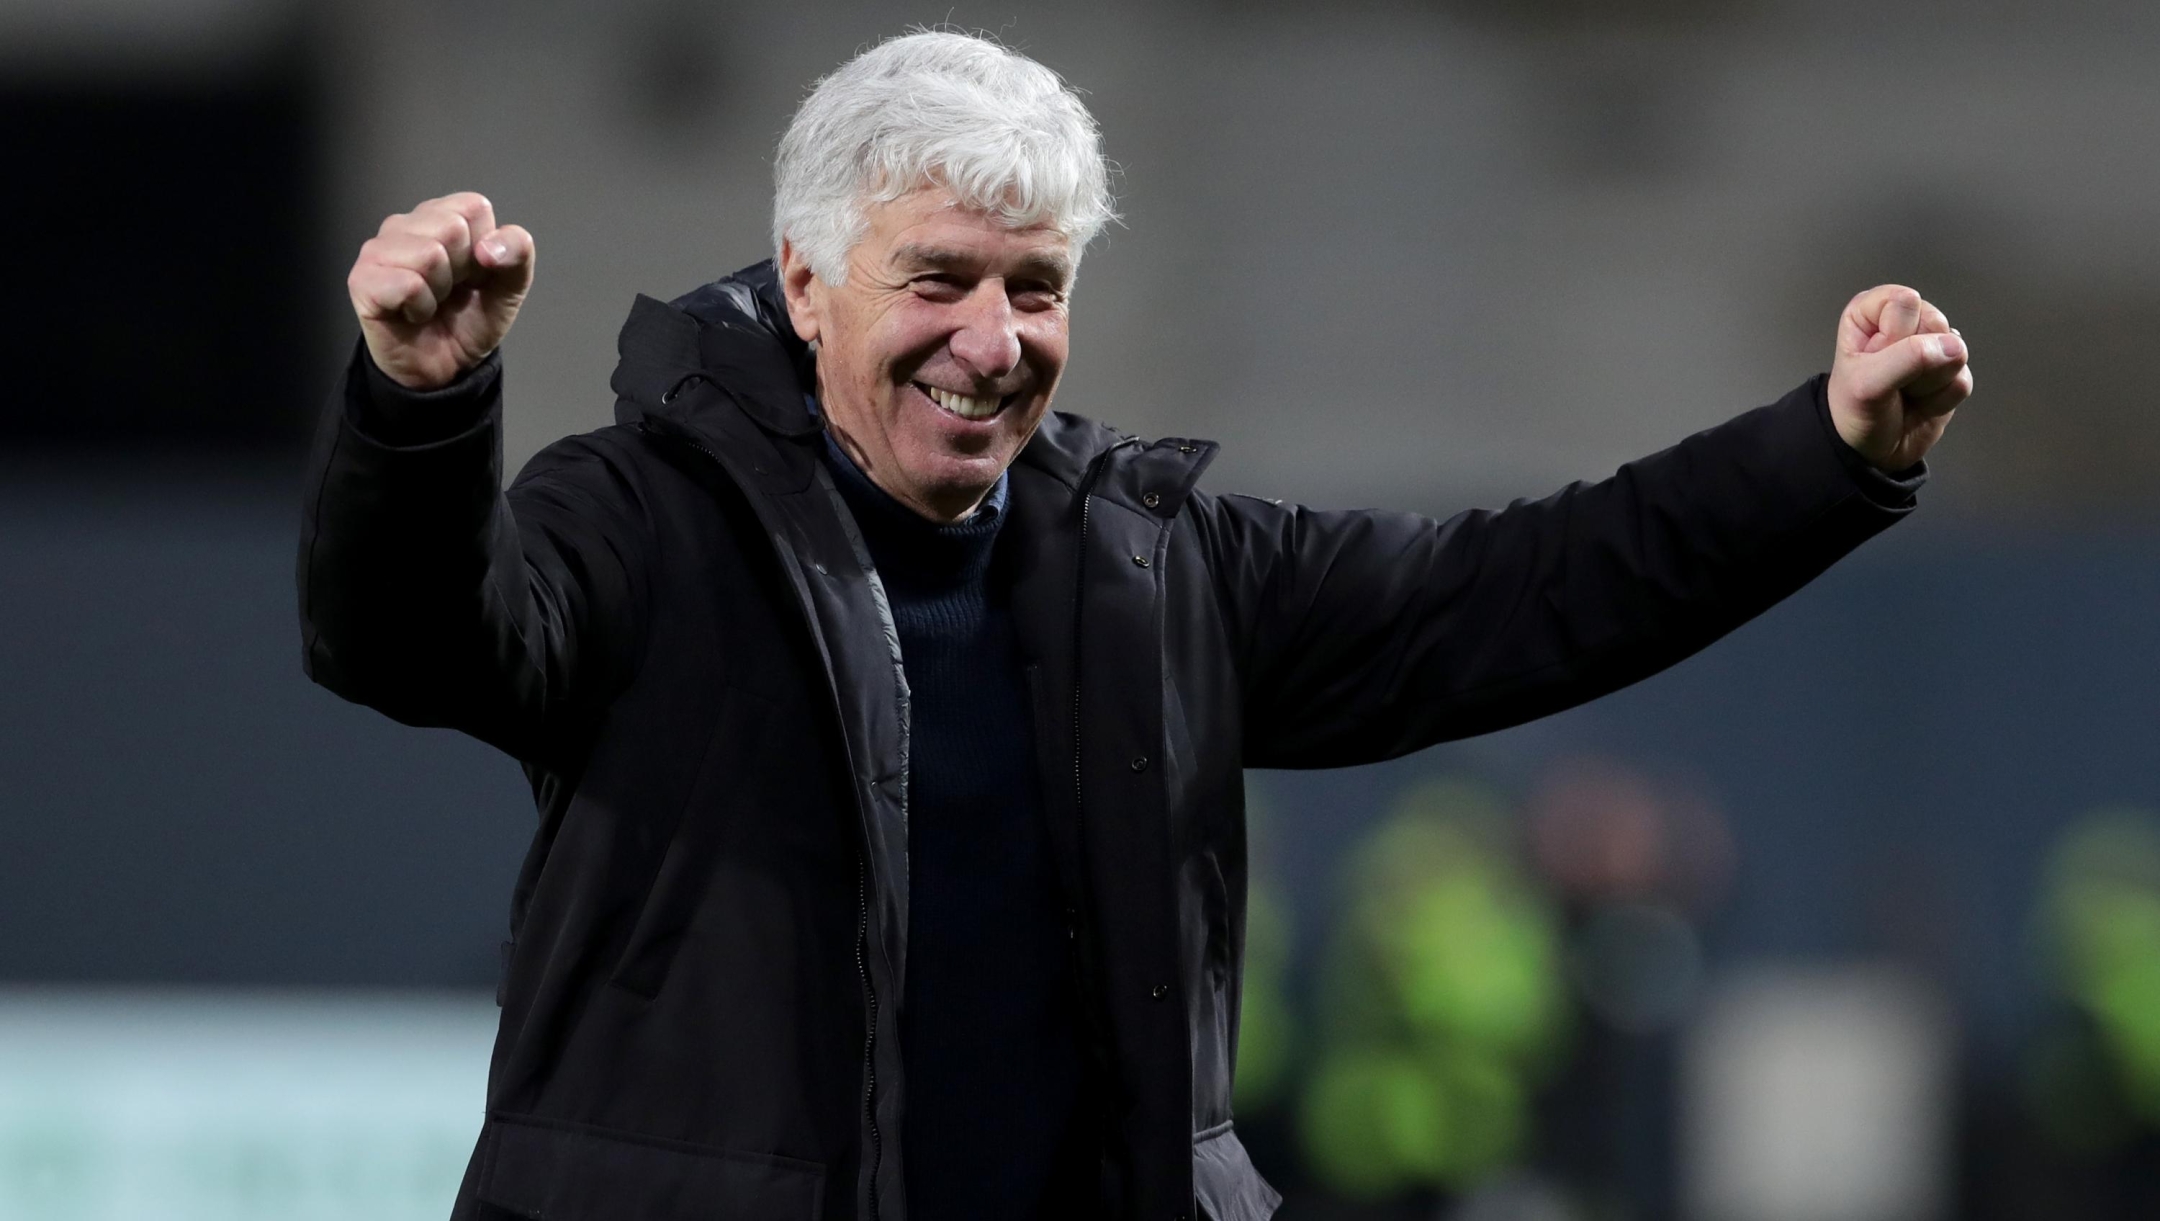 BERGAMO, ITALY - MARCH 14: Gian Piero Gasperini, Head Coach of Atalanta BC, celebrates following the team's victory during the UEFA Europa League 2023/24 round of 16 second leg match between Atalanta and Sporting CP at the Stadio di Bergamo on March 14, 2024 in Bergamo, Italy. (Photo by Emilio Andreoli/Getty Images)